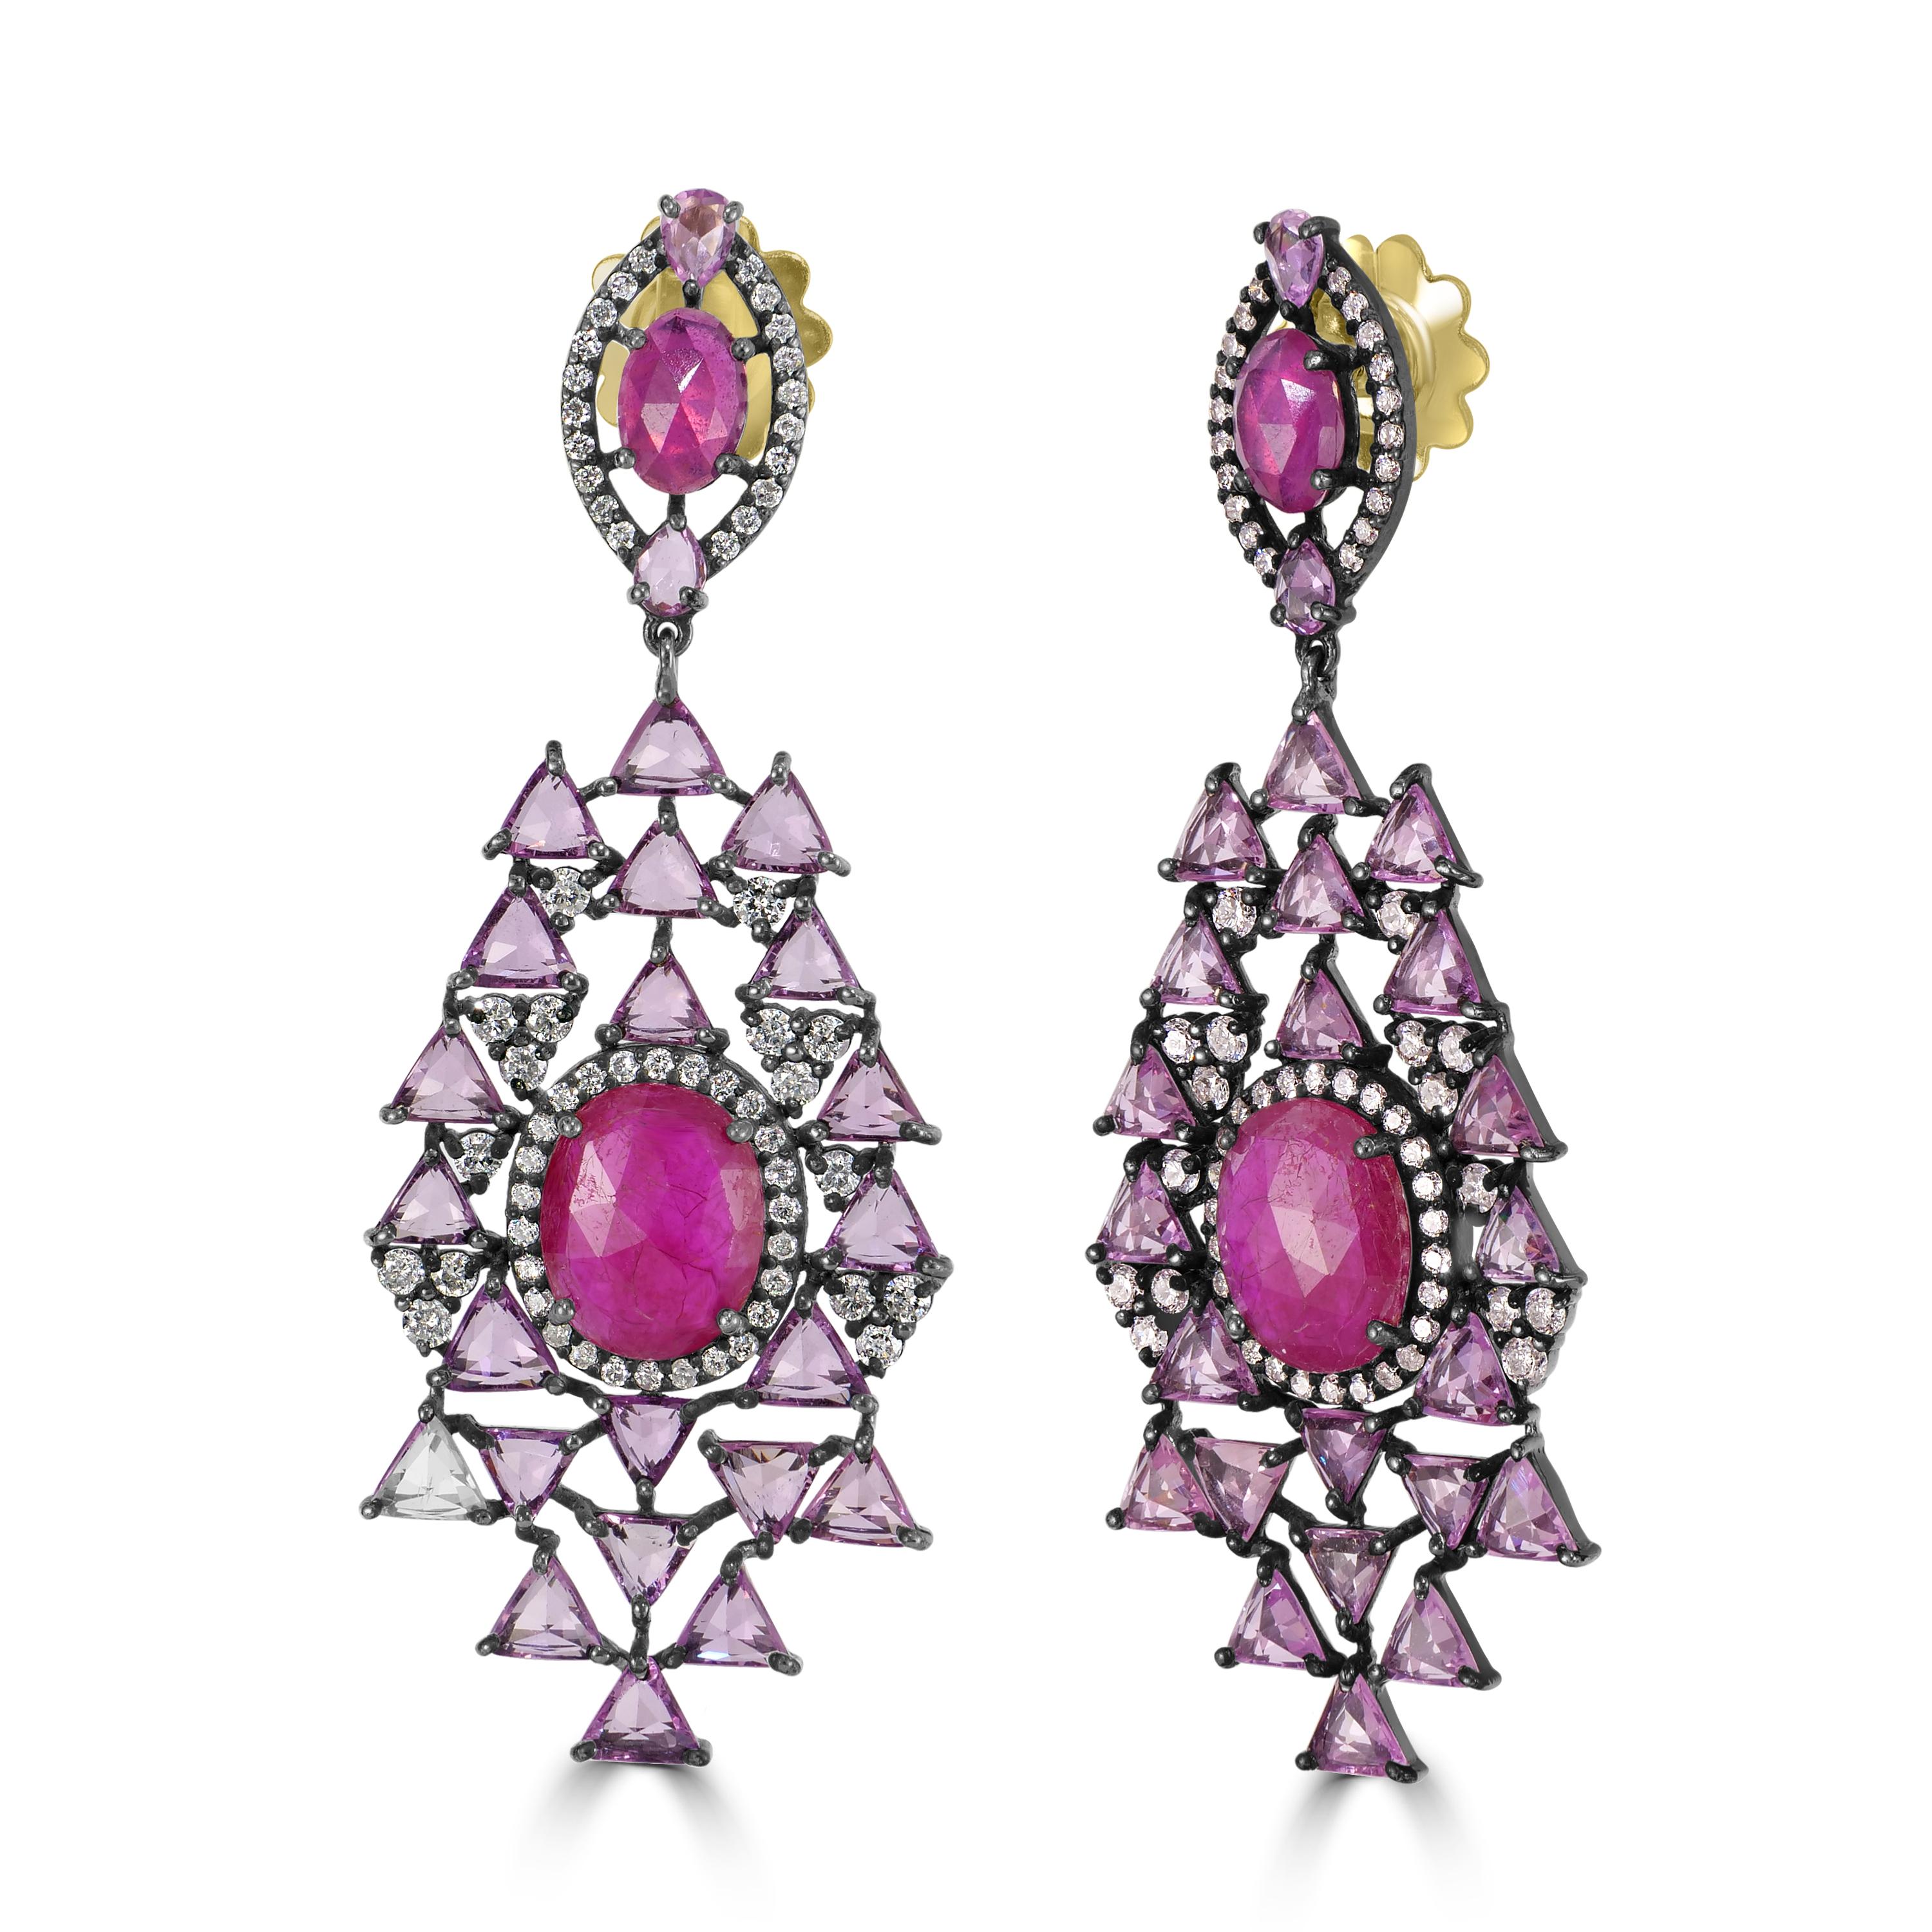 Introducing our exquisite Victorian 18.16 Cttw. Ruby, Pink Sapphire, and Diamond Dangle Earrings, a masterpiece of timeless elegance and sophistication.

At the heart of each earring lies a mesmerizing oval ruby, surrounded by a halo of dazzling